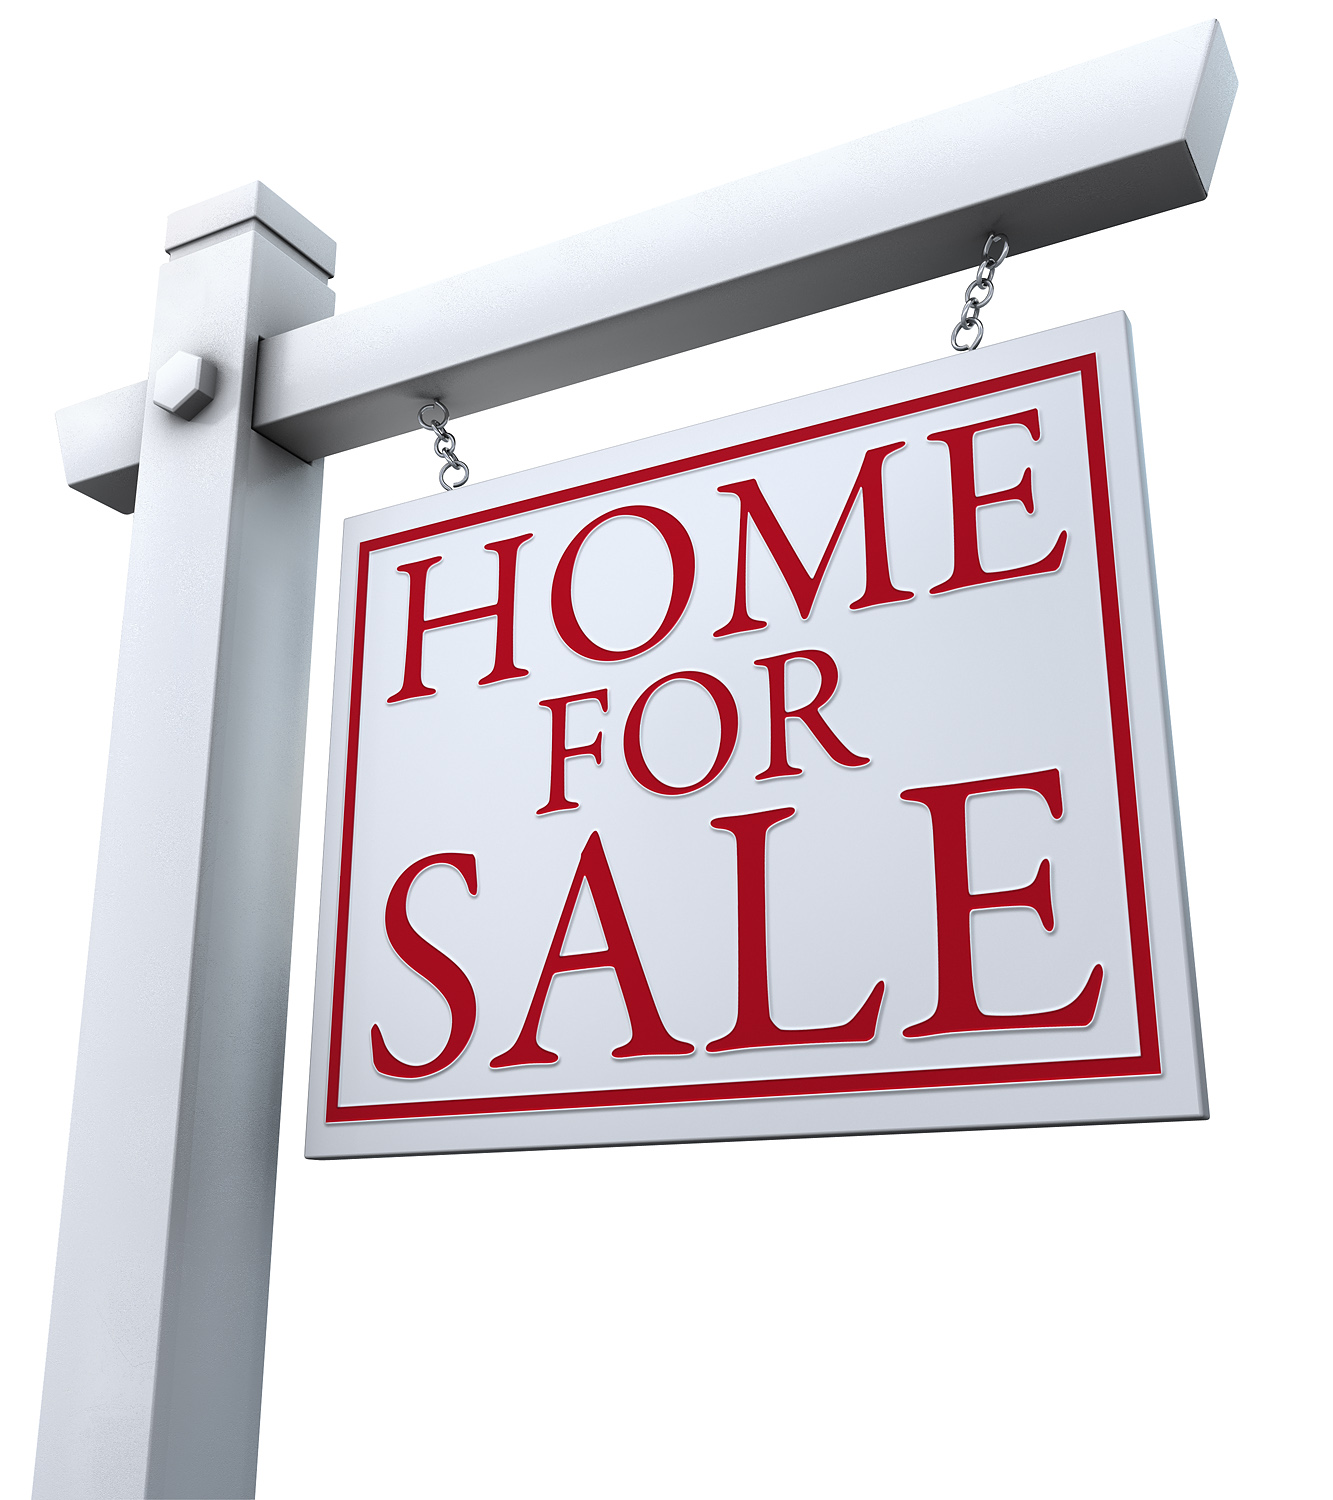 House For Sale Sign Clip Art | Clipart library - Free Clipart Images